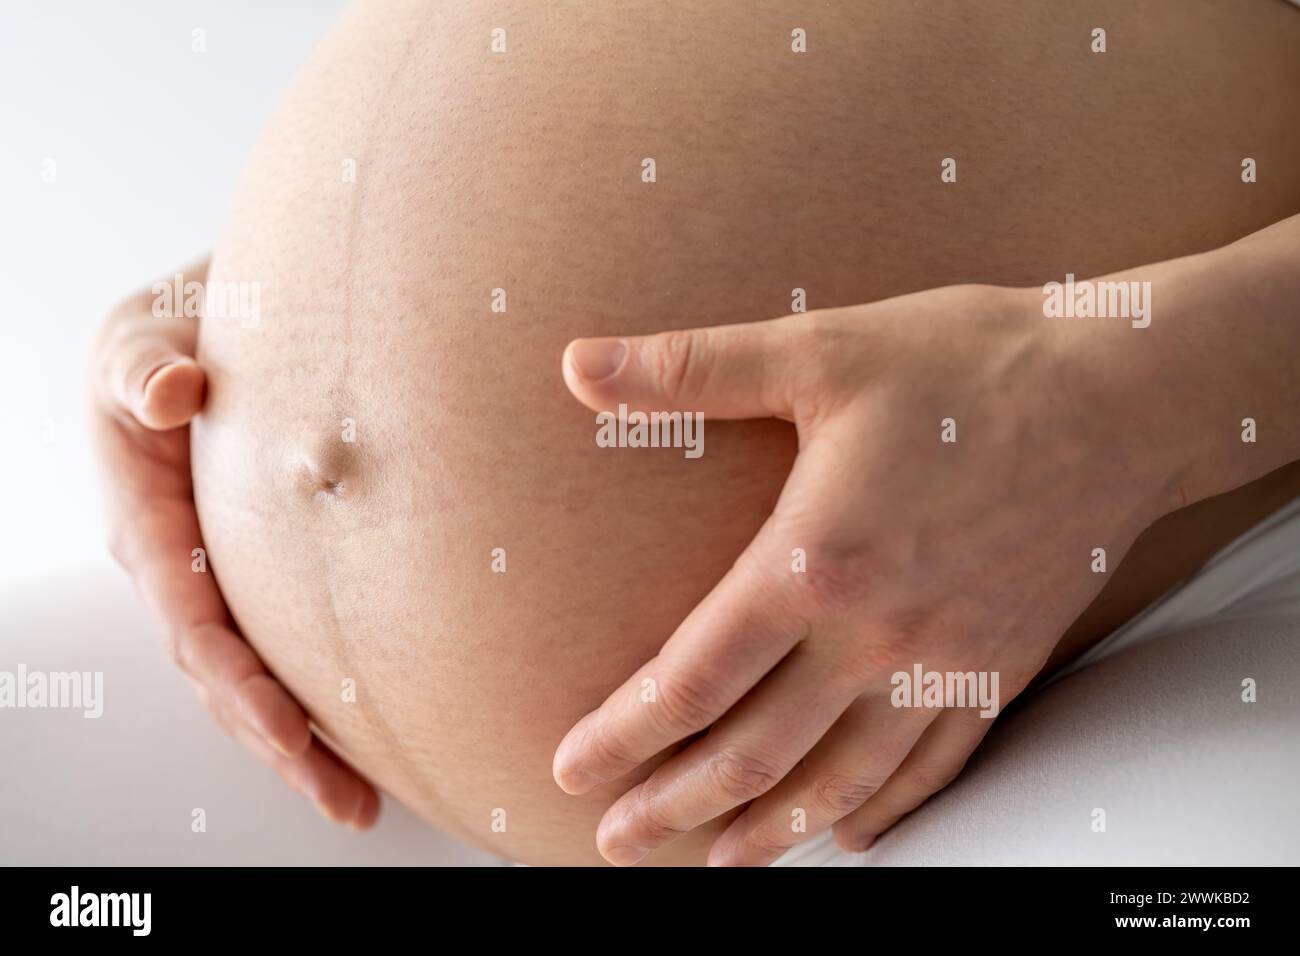 Description: Closeup of a mother sitting and gently holding her very round pregnant baby belly. Side angle view. White background. Bright shot. Stock Photo